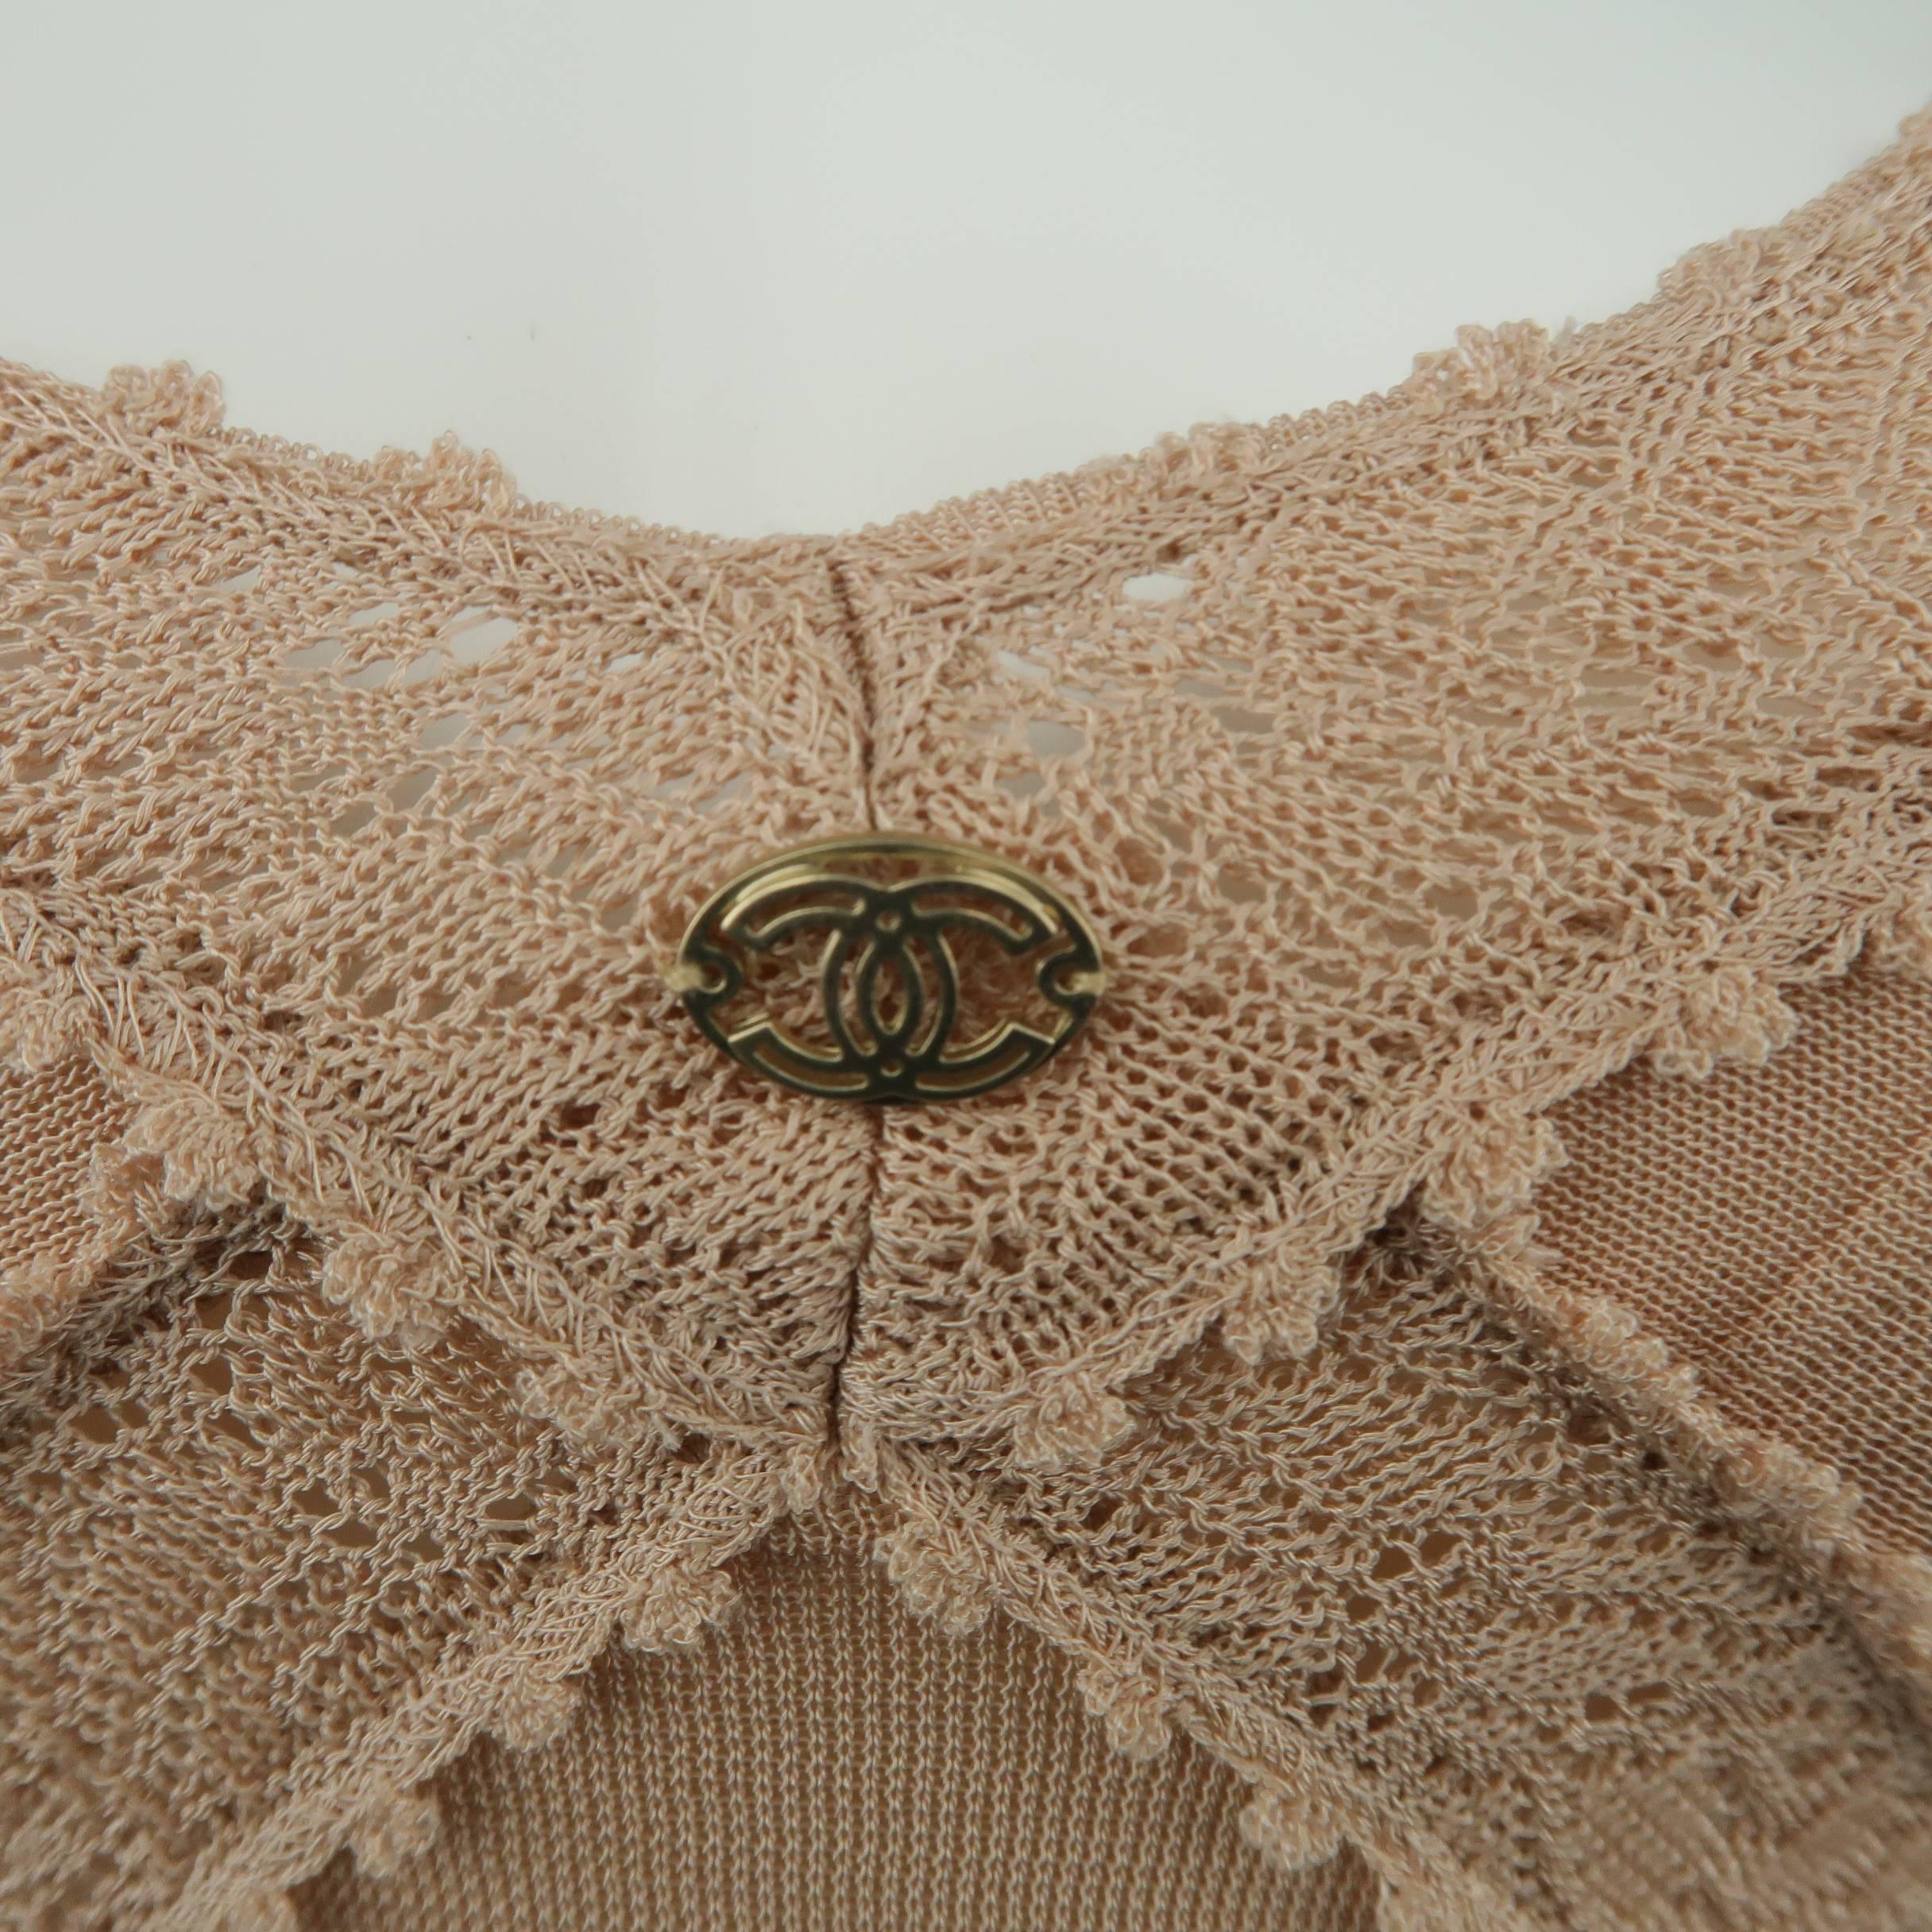 CHANEL camisole top comes in muted rose pink rayon knit with skinny, textured straps, bandage like constructions, knit lace trim, pleated hem, and gold tone logo. Made in France.
 
Good Pre-Owned Condition.
Marked: FR 40  (07C)
 
Measurements:
